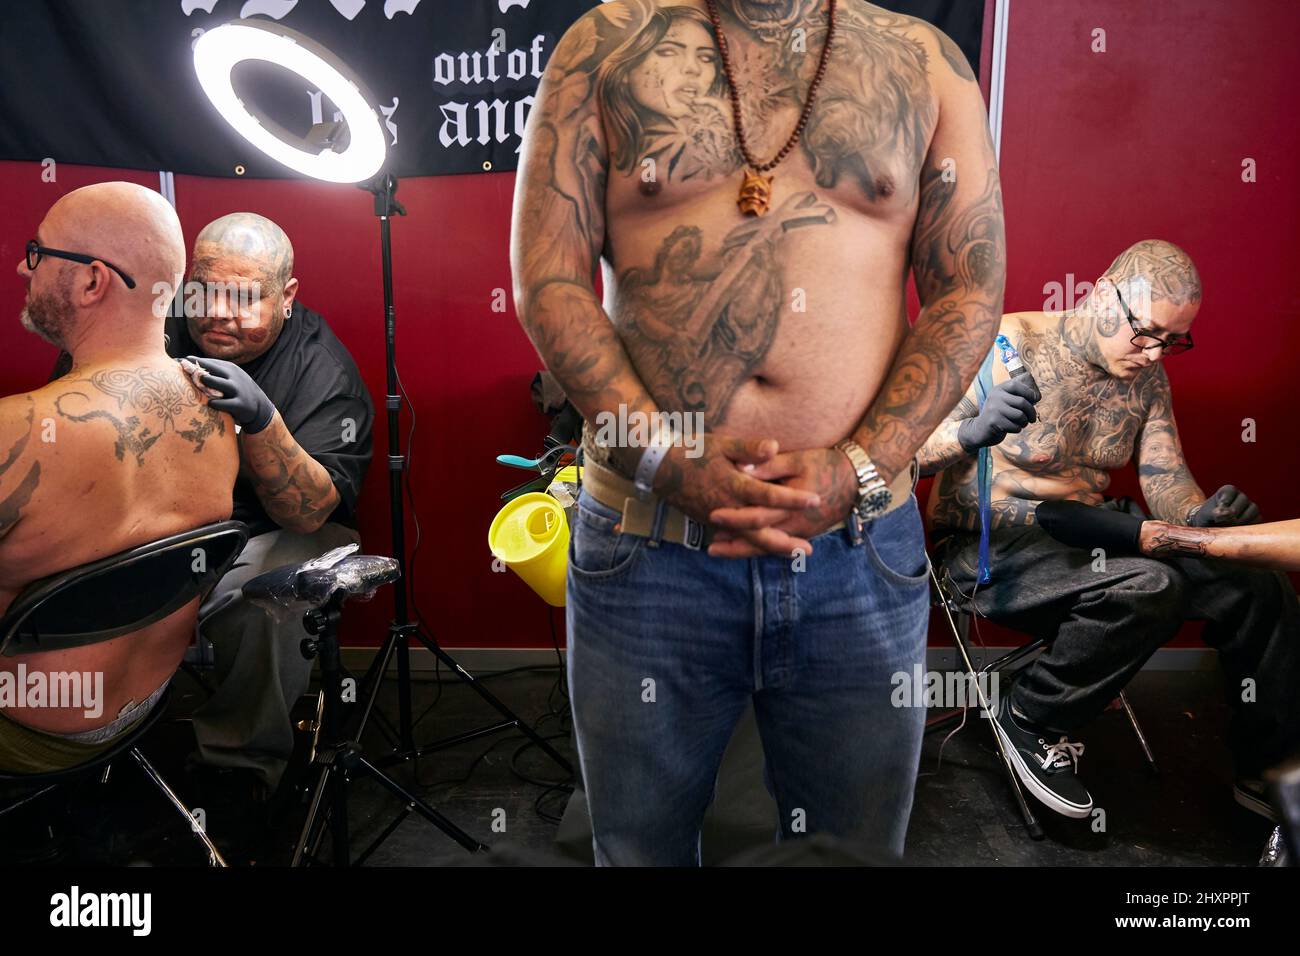 The tattooists work on their designs at the Bakes-Tattoo stand in Amsterdam Stock Photo